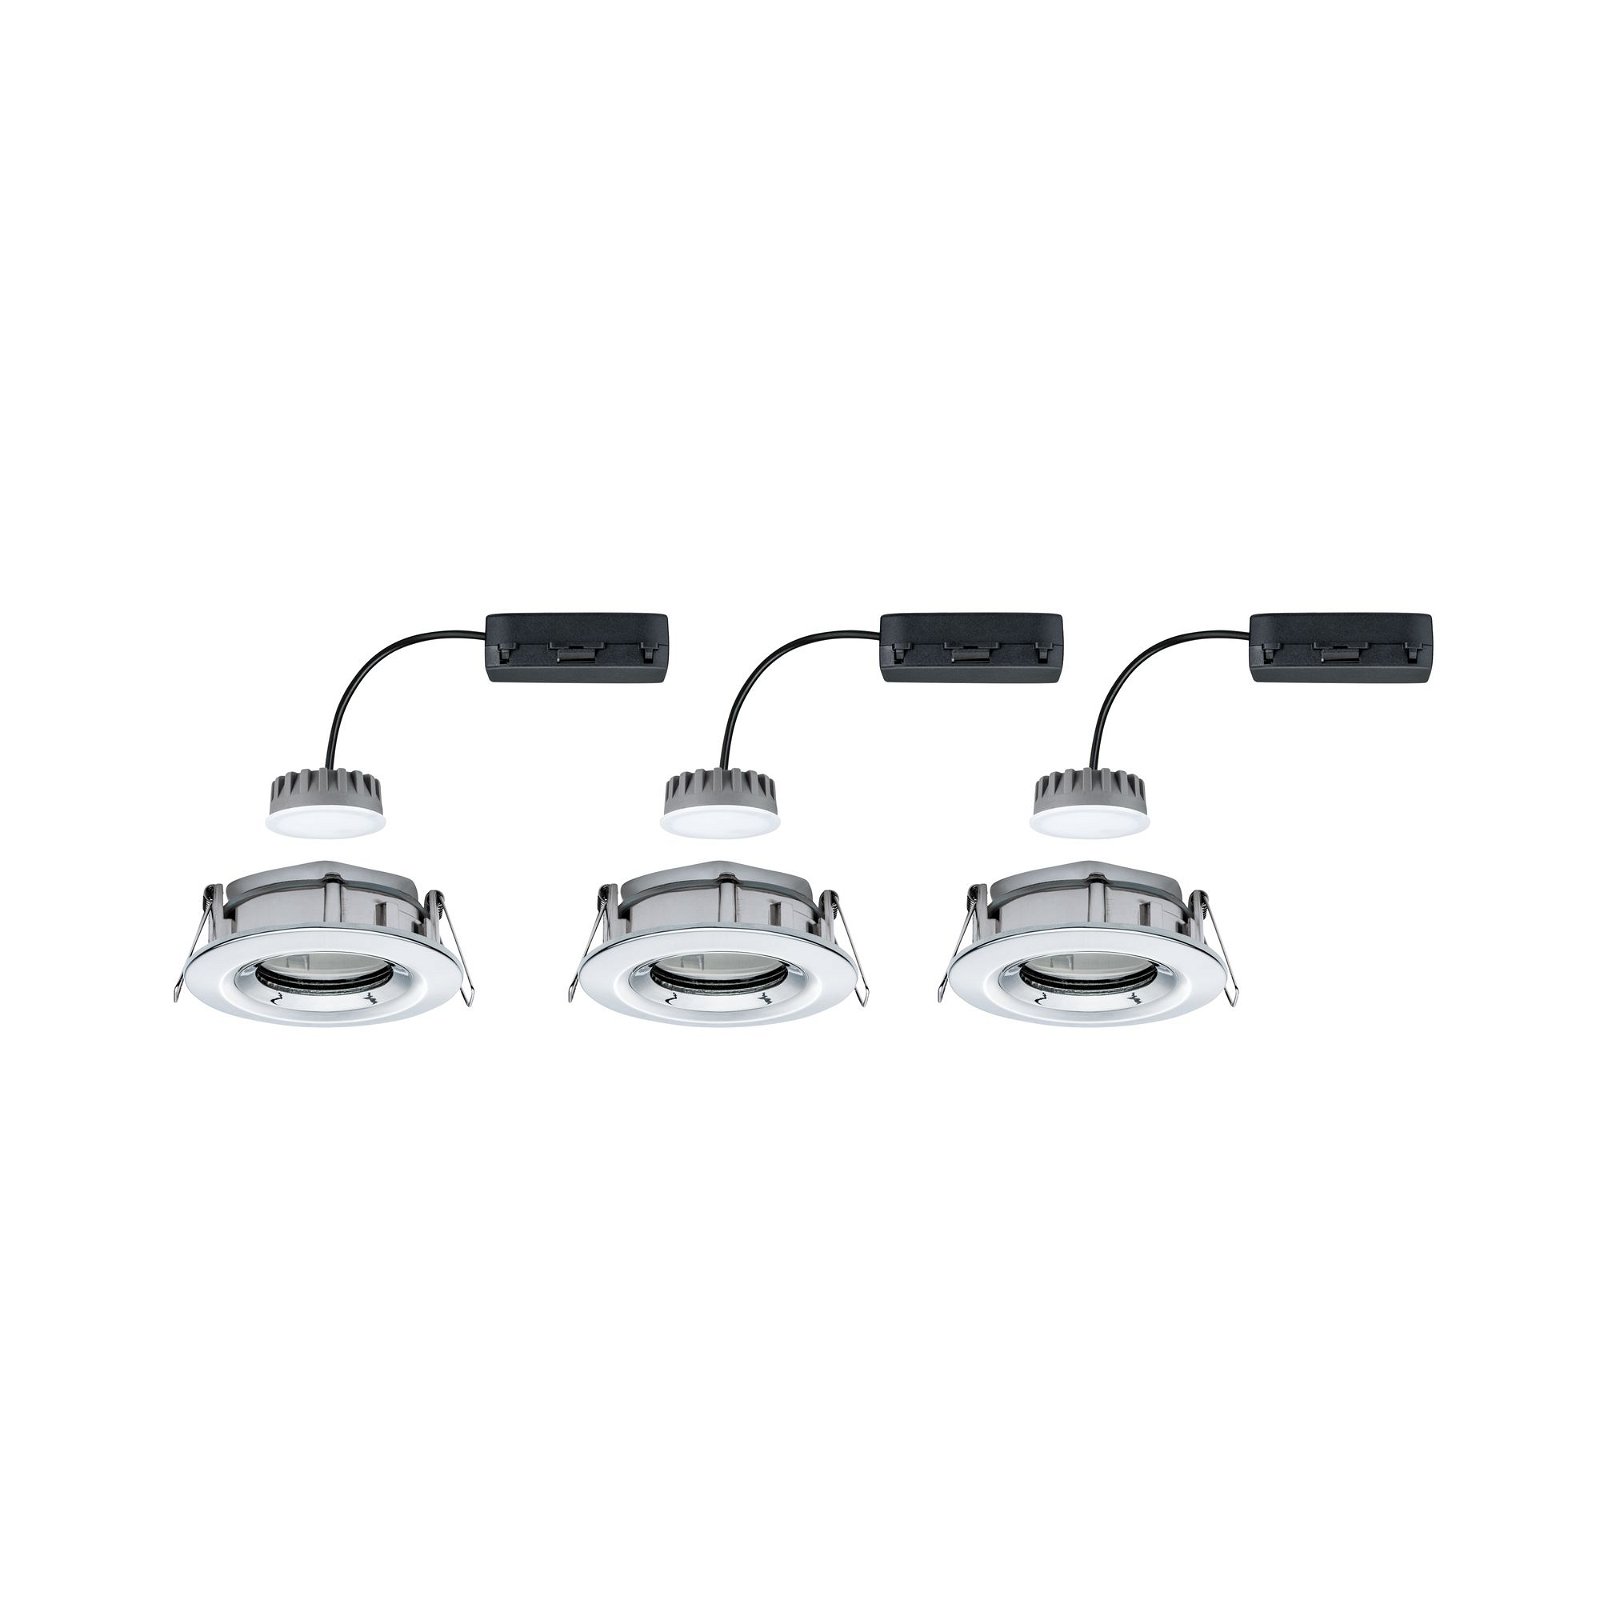 LED Recessed luminaire Nova Plus Coin Basic Set Swivelling IP65 round 93mm 30° Coin 3x6W 3x470lm 230V dimmable 2700K Chrome